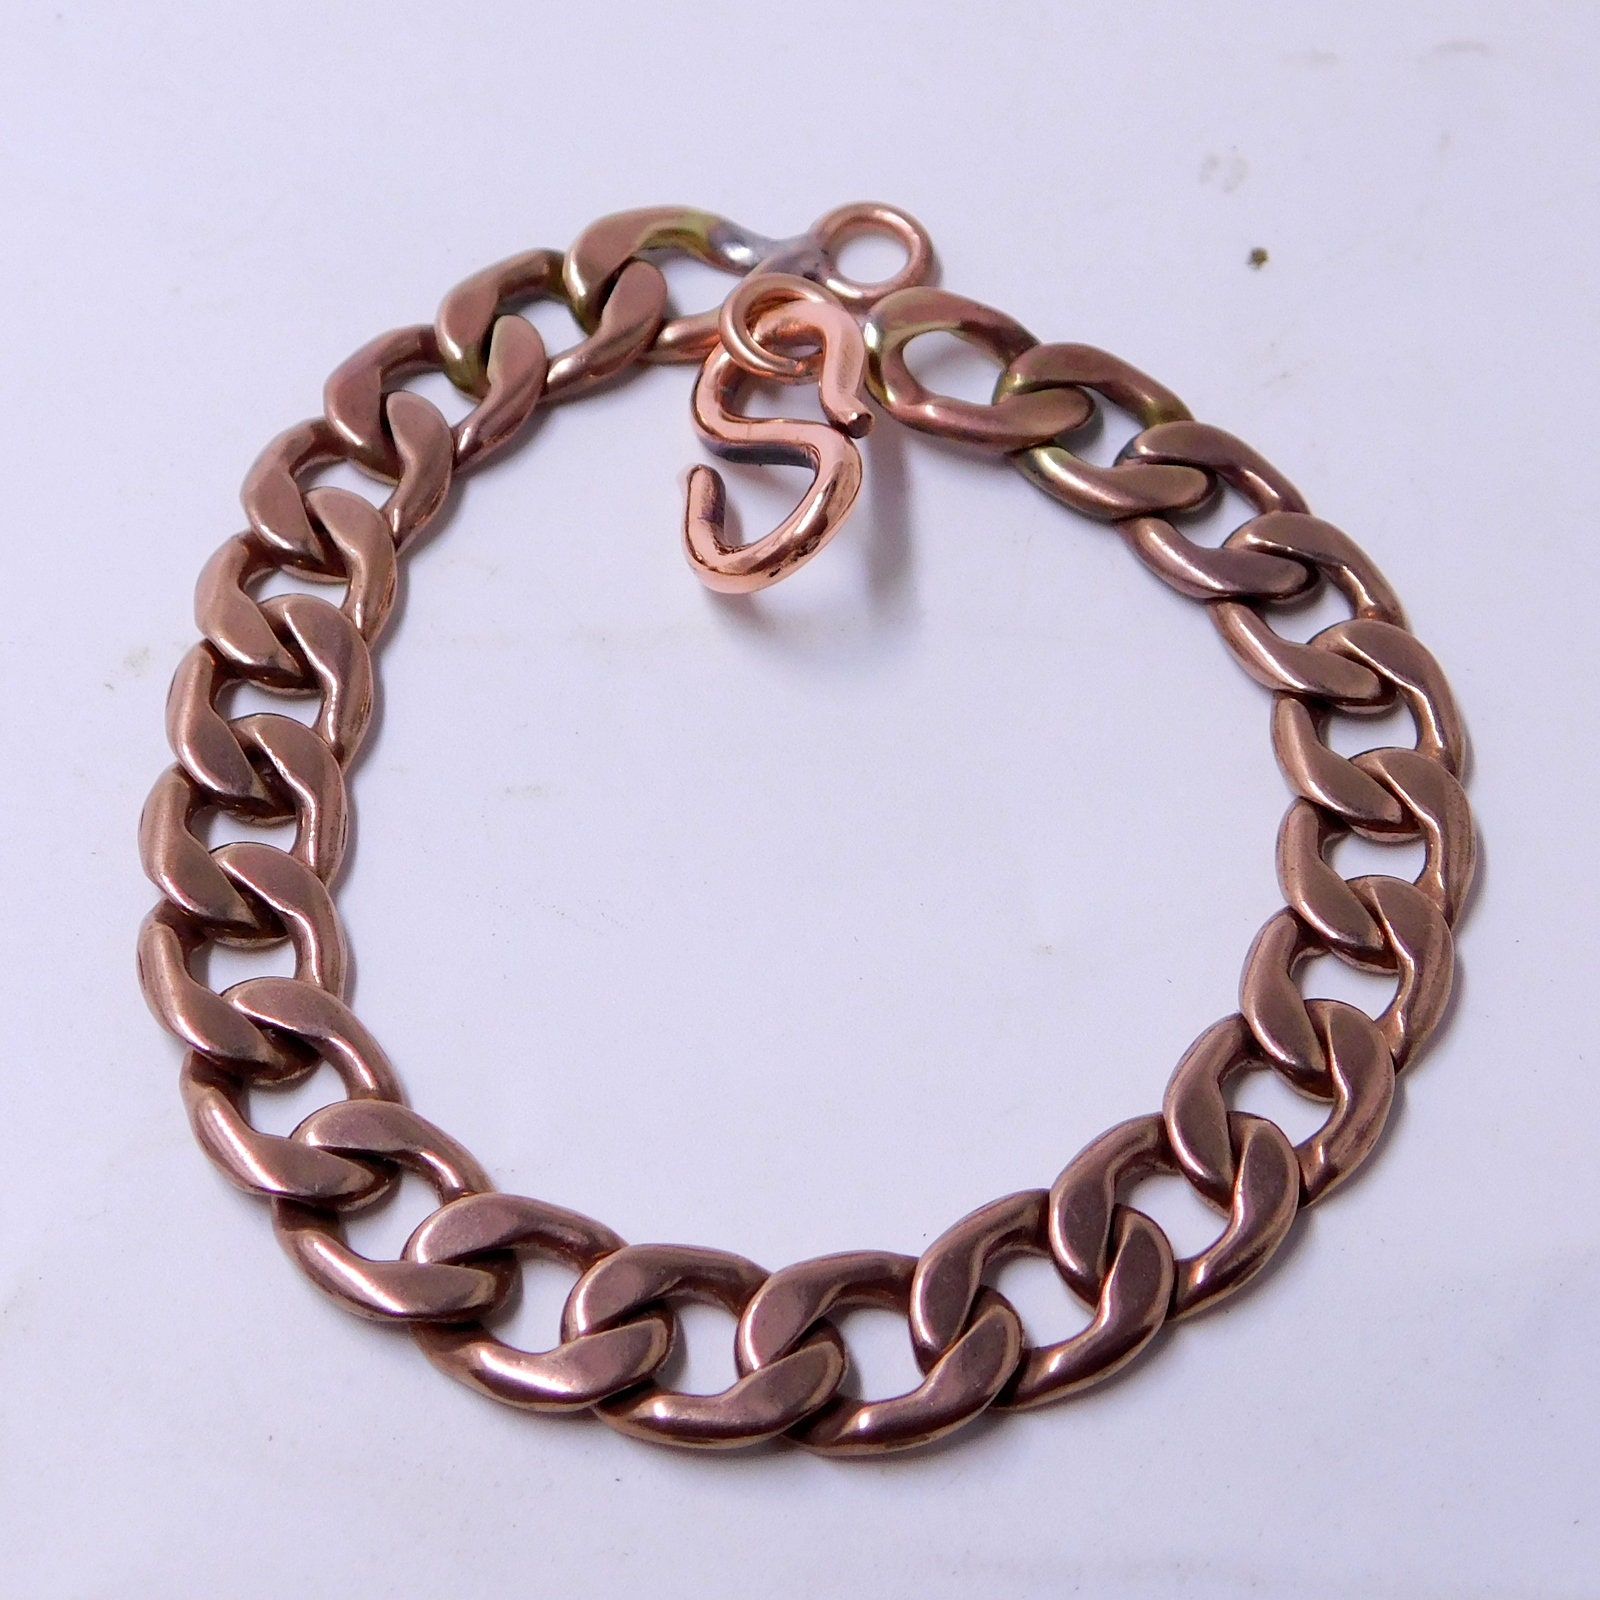 UNICEF Market | Handcrafted Copper Byzantine Chain Bracelet from Mexico -  Bright Creativity